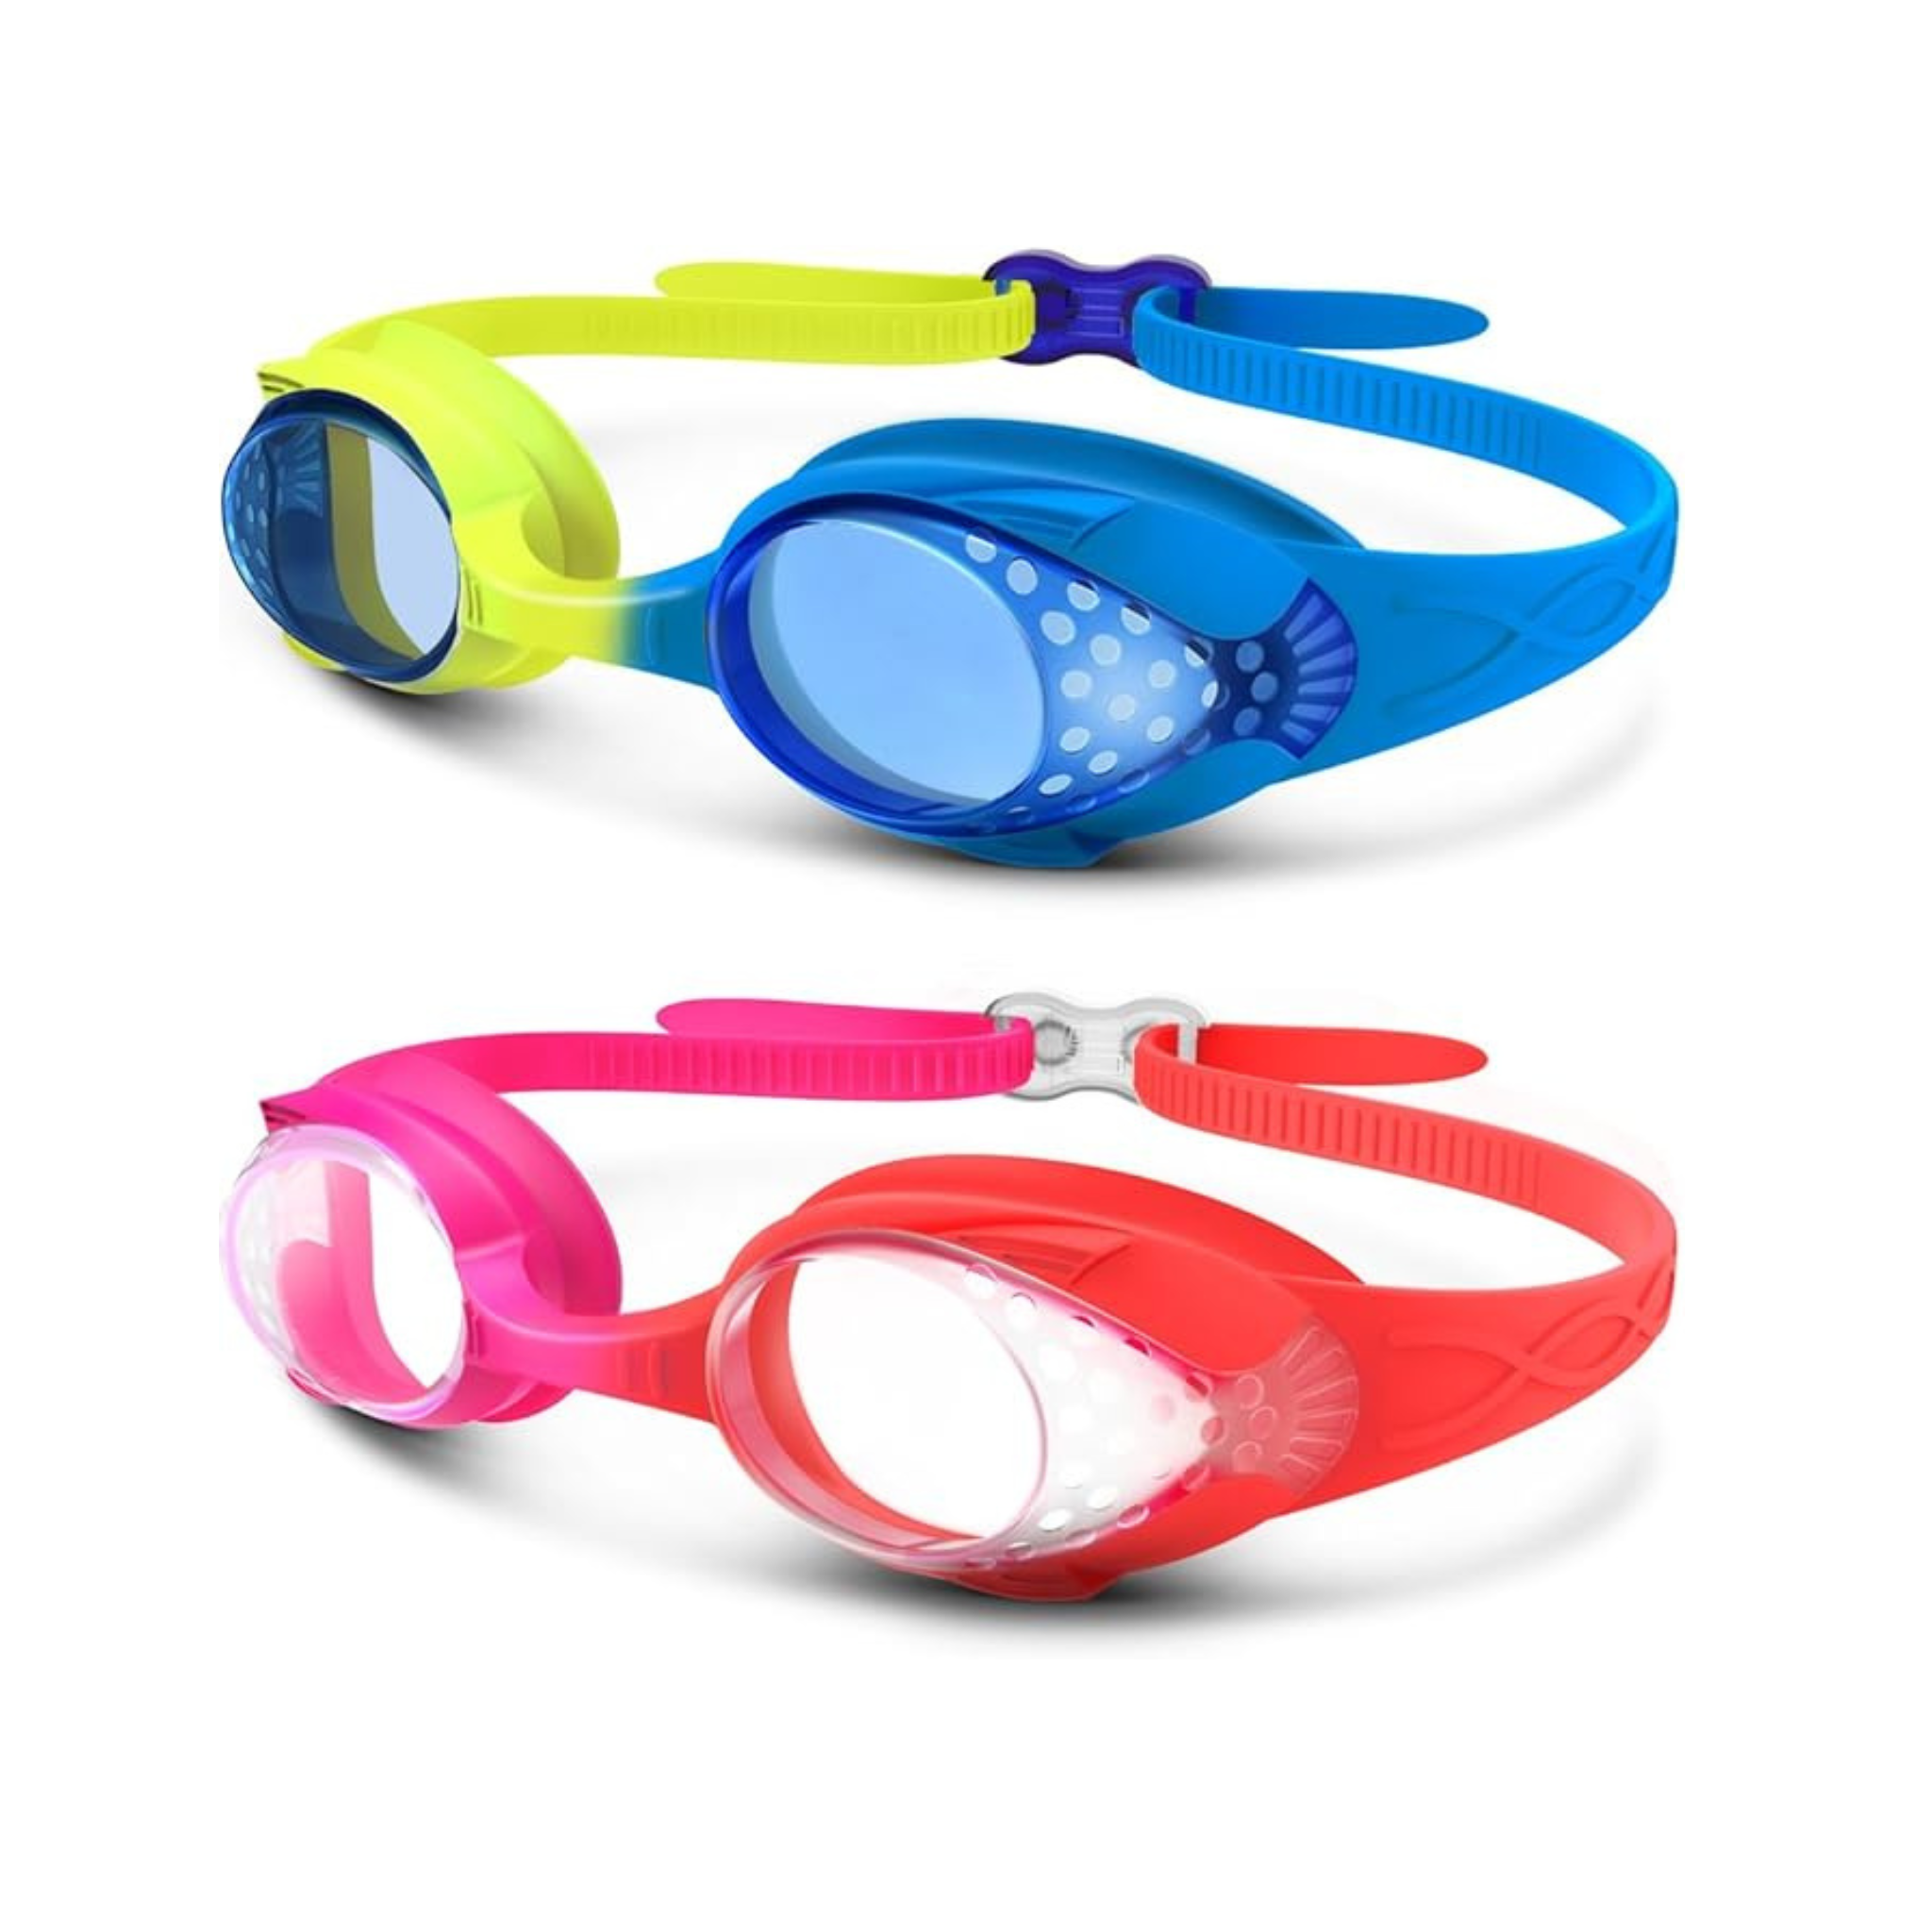 OutdoorMaster Kids Swim Goggles 2 Pack – Quick Adjustable Strap (choose from 6 color combos)